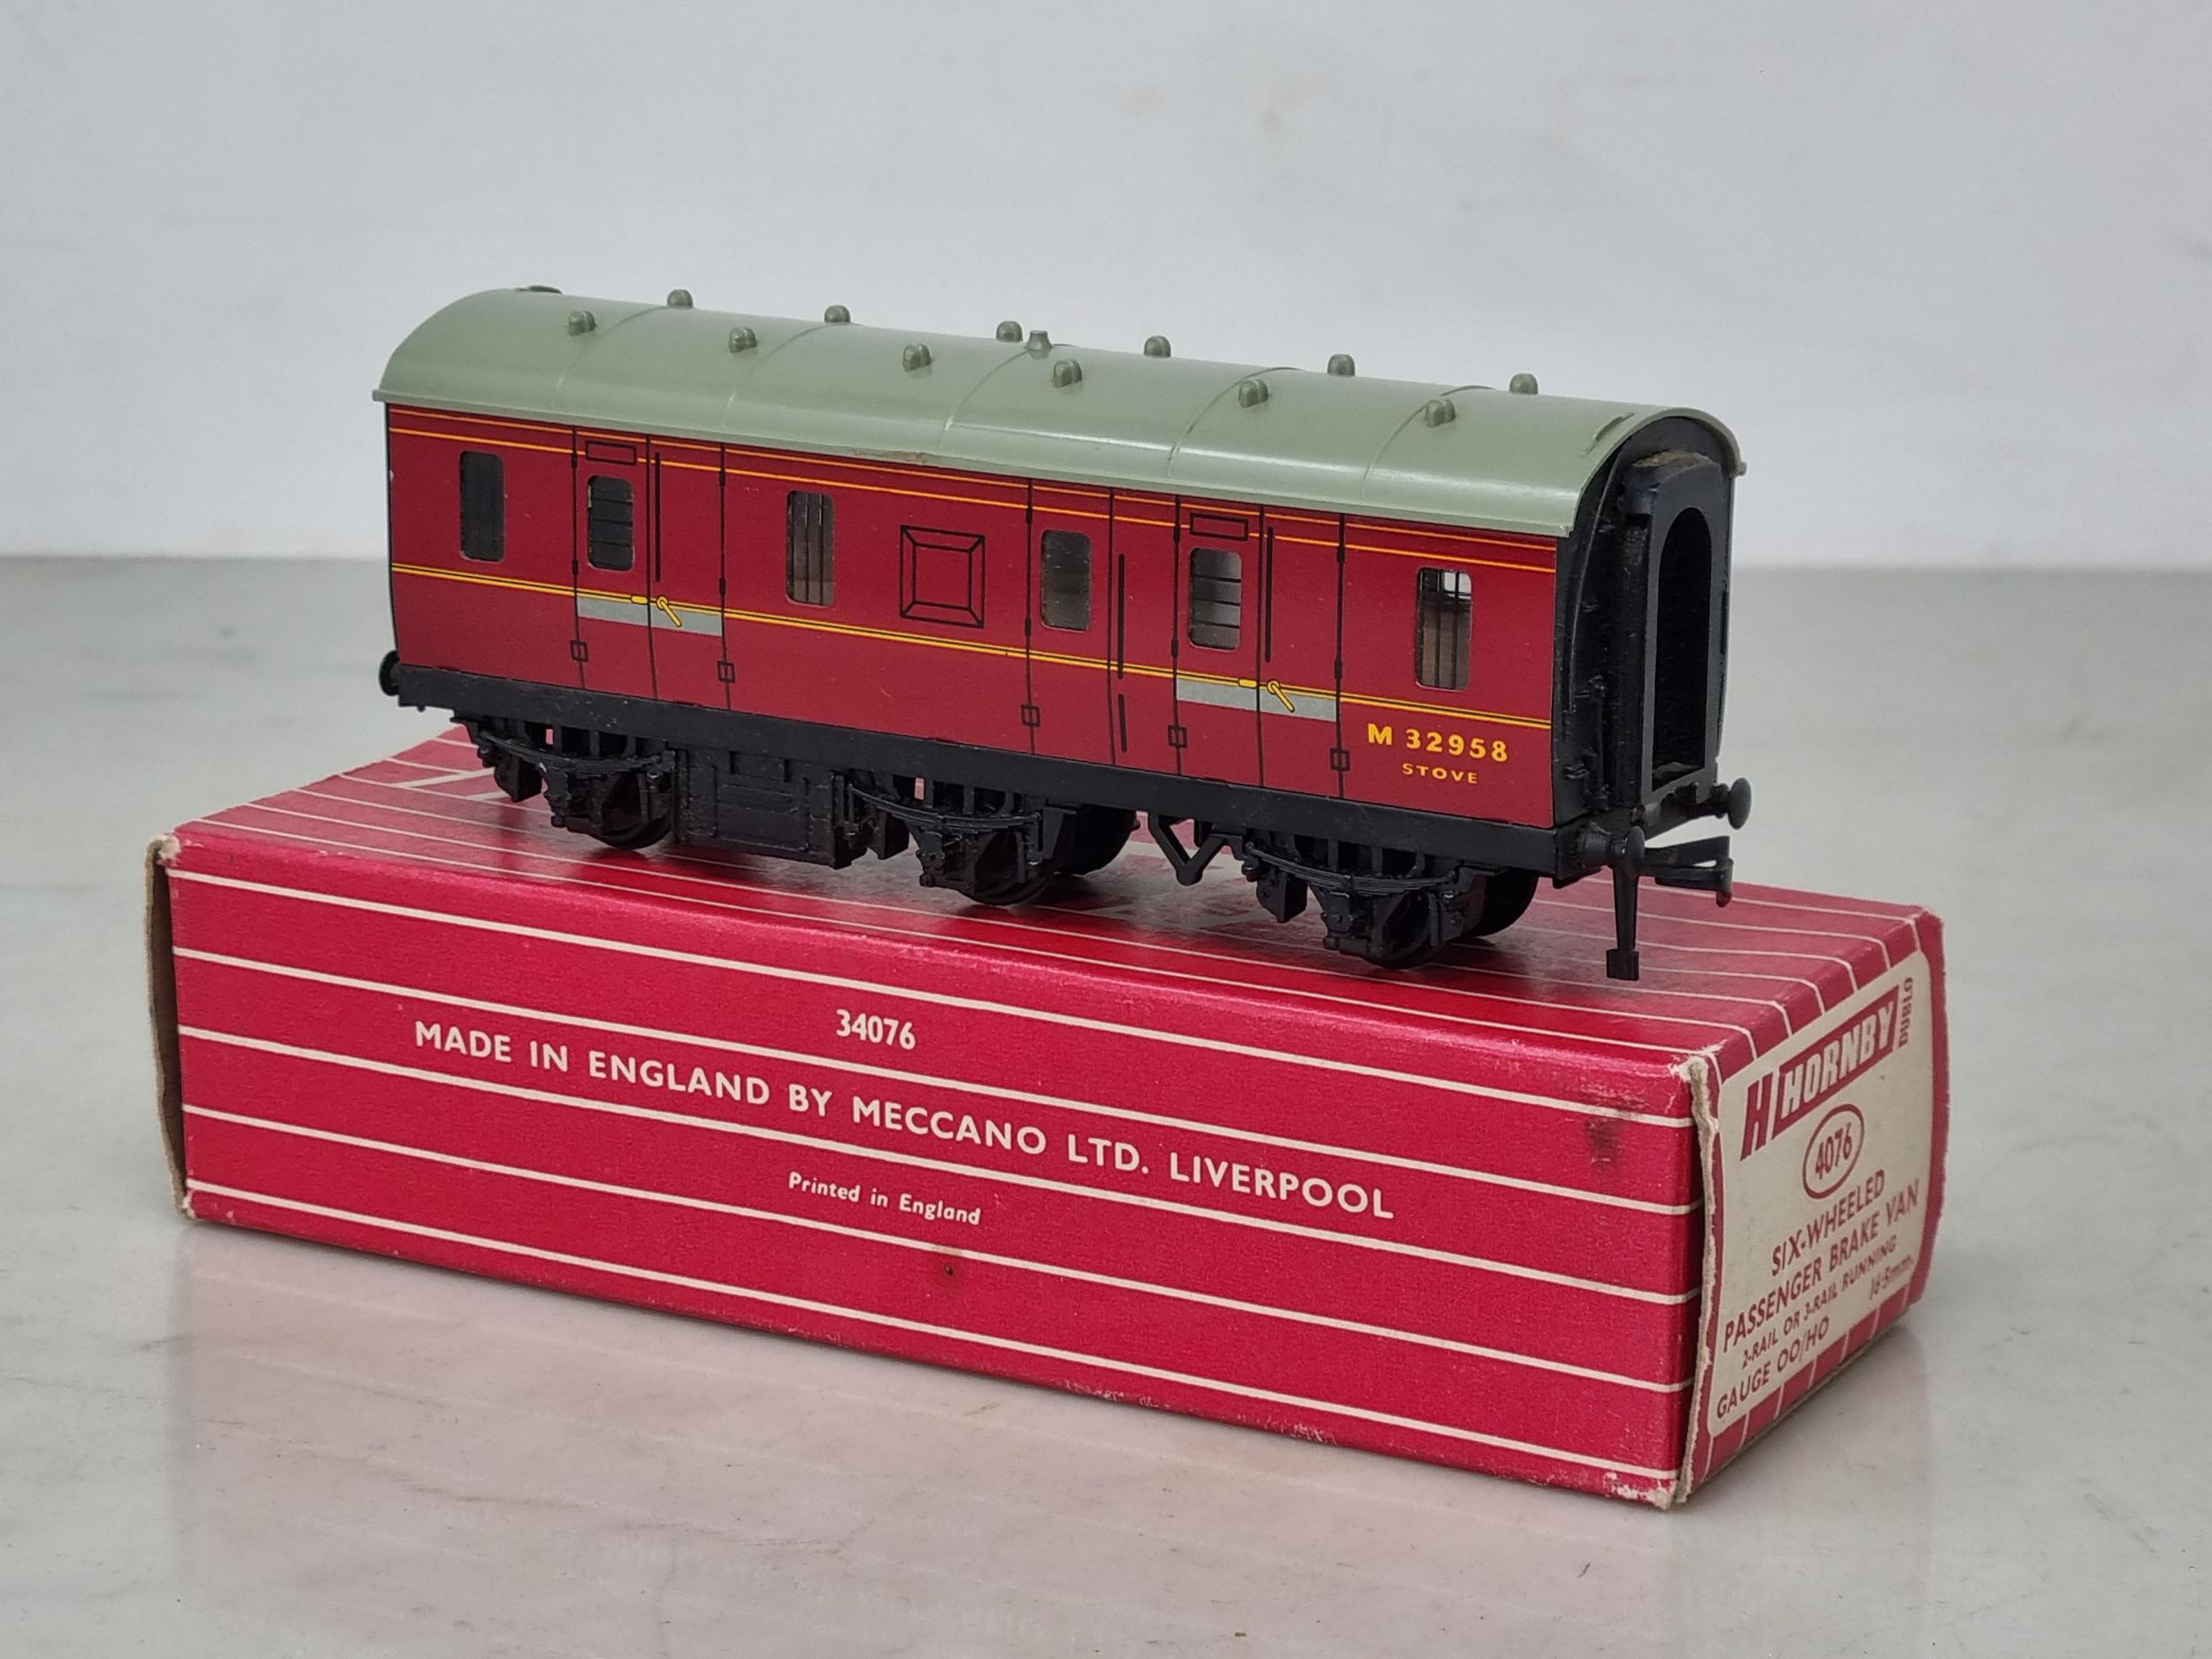 A boxed Hornby Dublo 4076 Six-wheel Passenger Brake Van, unused and in mint condition. Box in superb